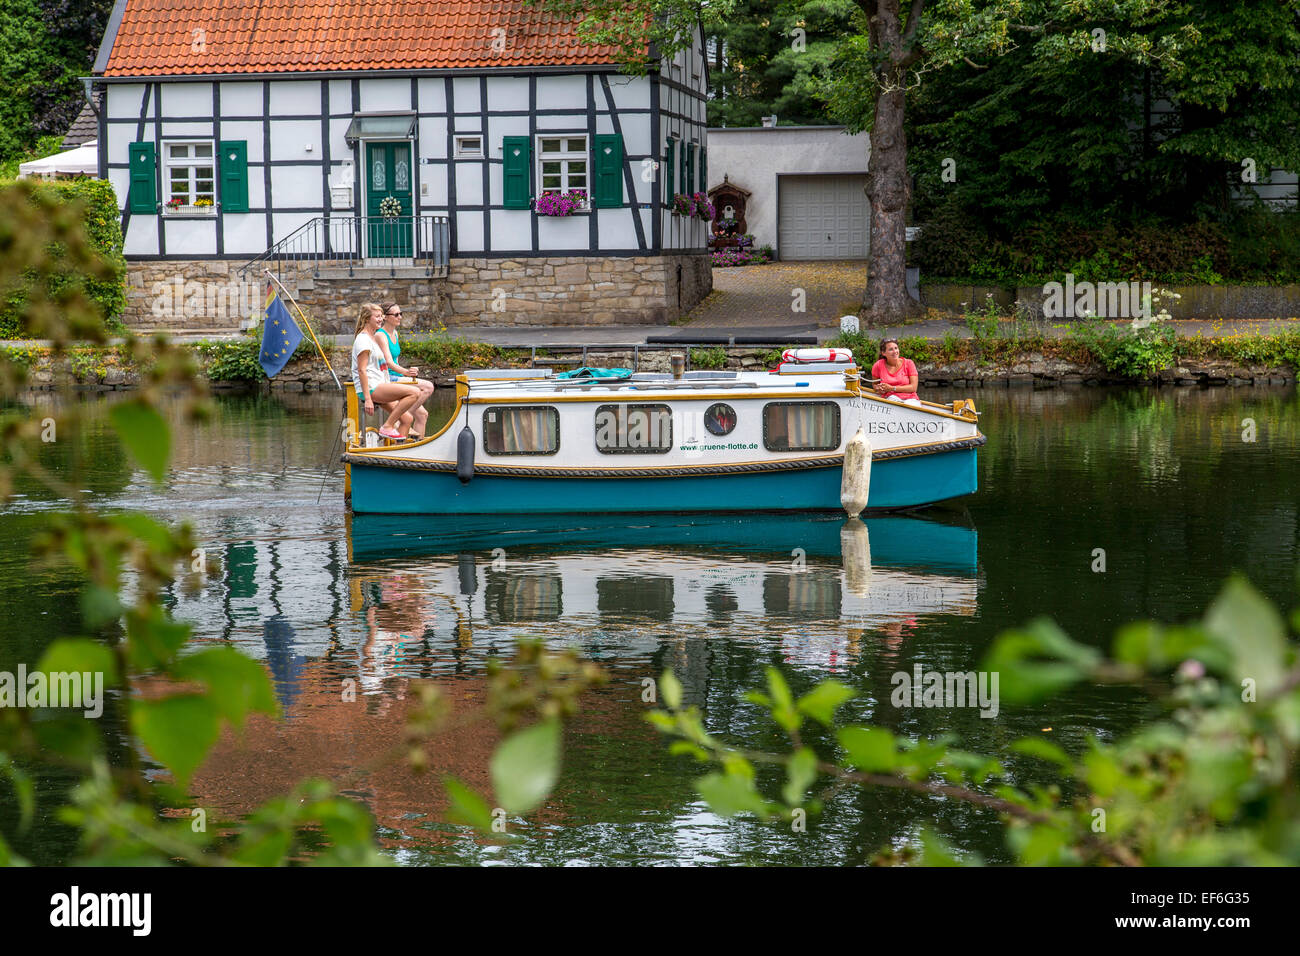 Pedal boat, houseboat 'Escargot', self driven boat with accommodation for 4 people on river Ruhr, Stock Photo